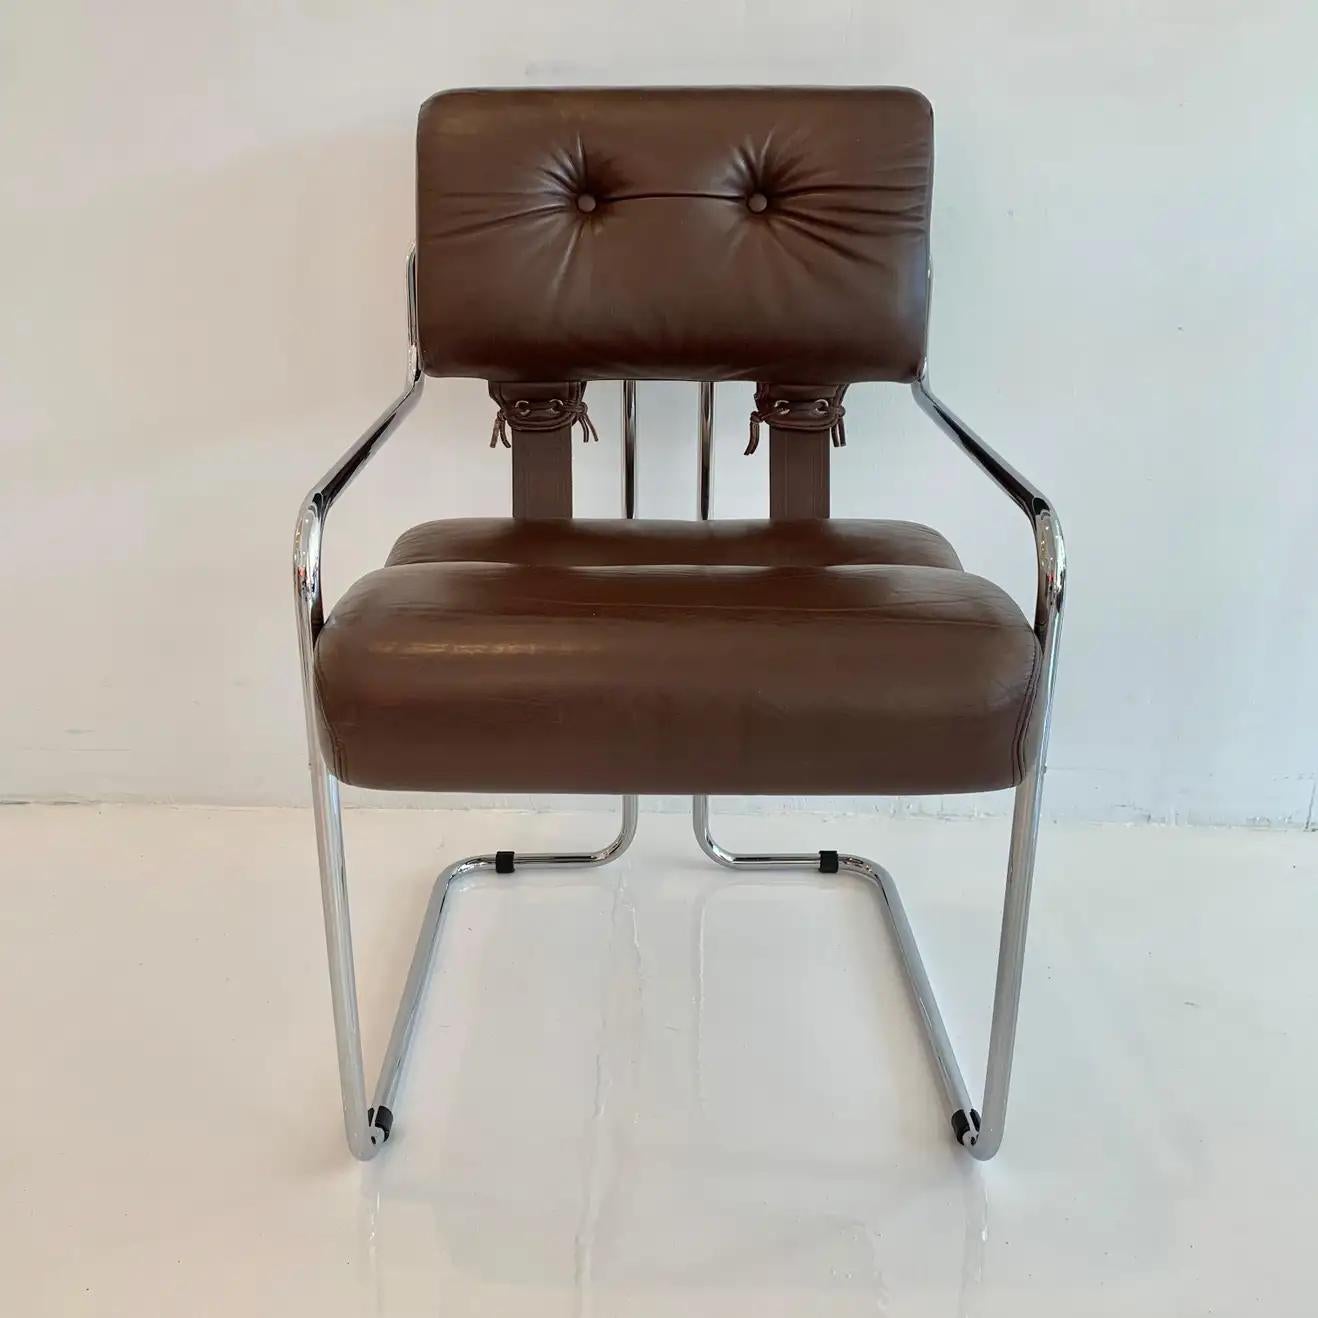 Classic leather chairs by Guido Faleschini for Pace. Tubular chrome chair with original brown leather. All metal has been re-plated in chrome and is in excellent condition. Great color and patina. Very good vintage condition to leather. 

2